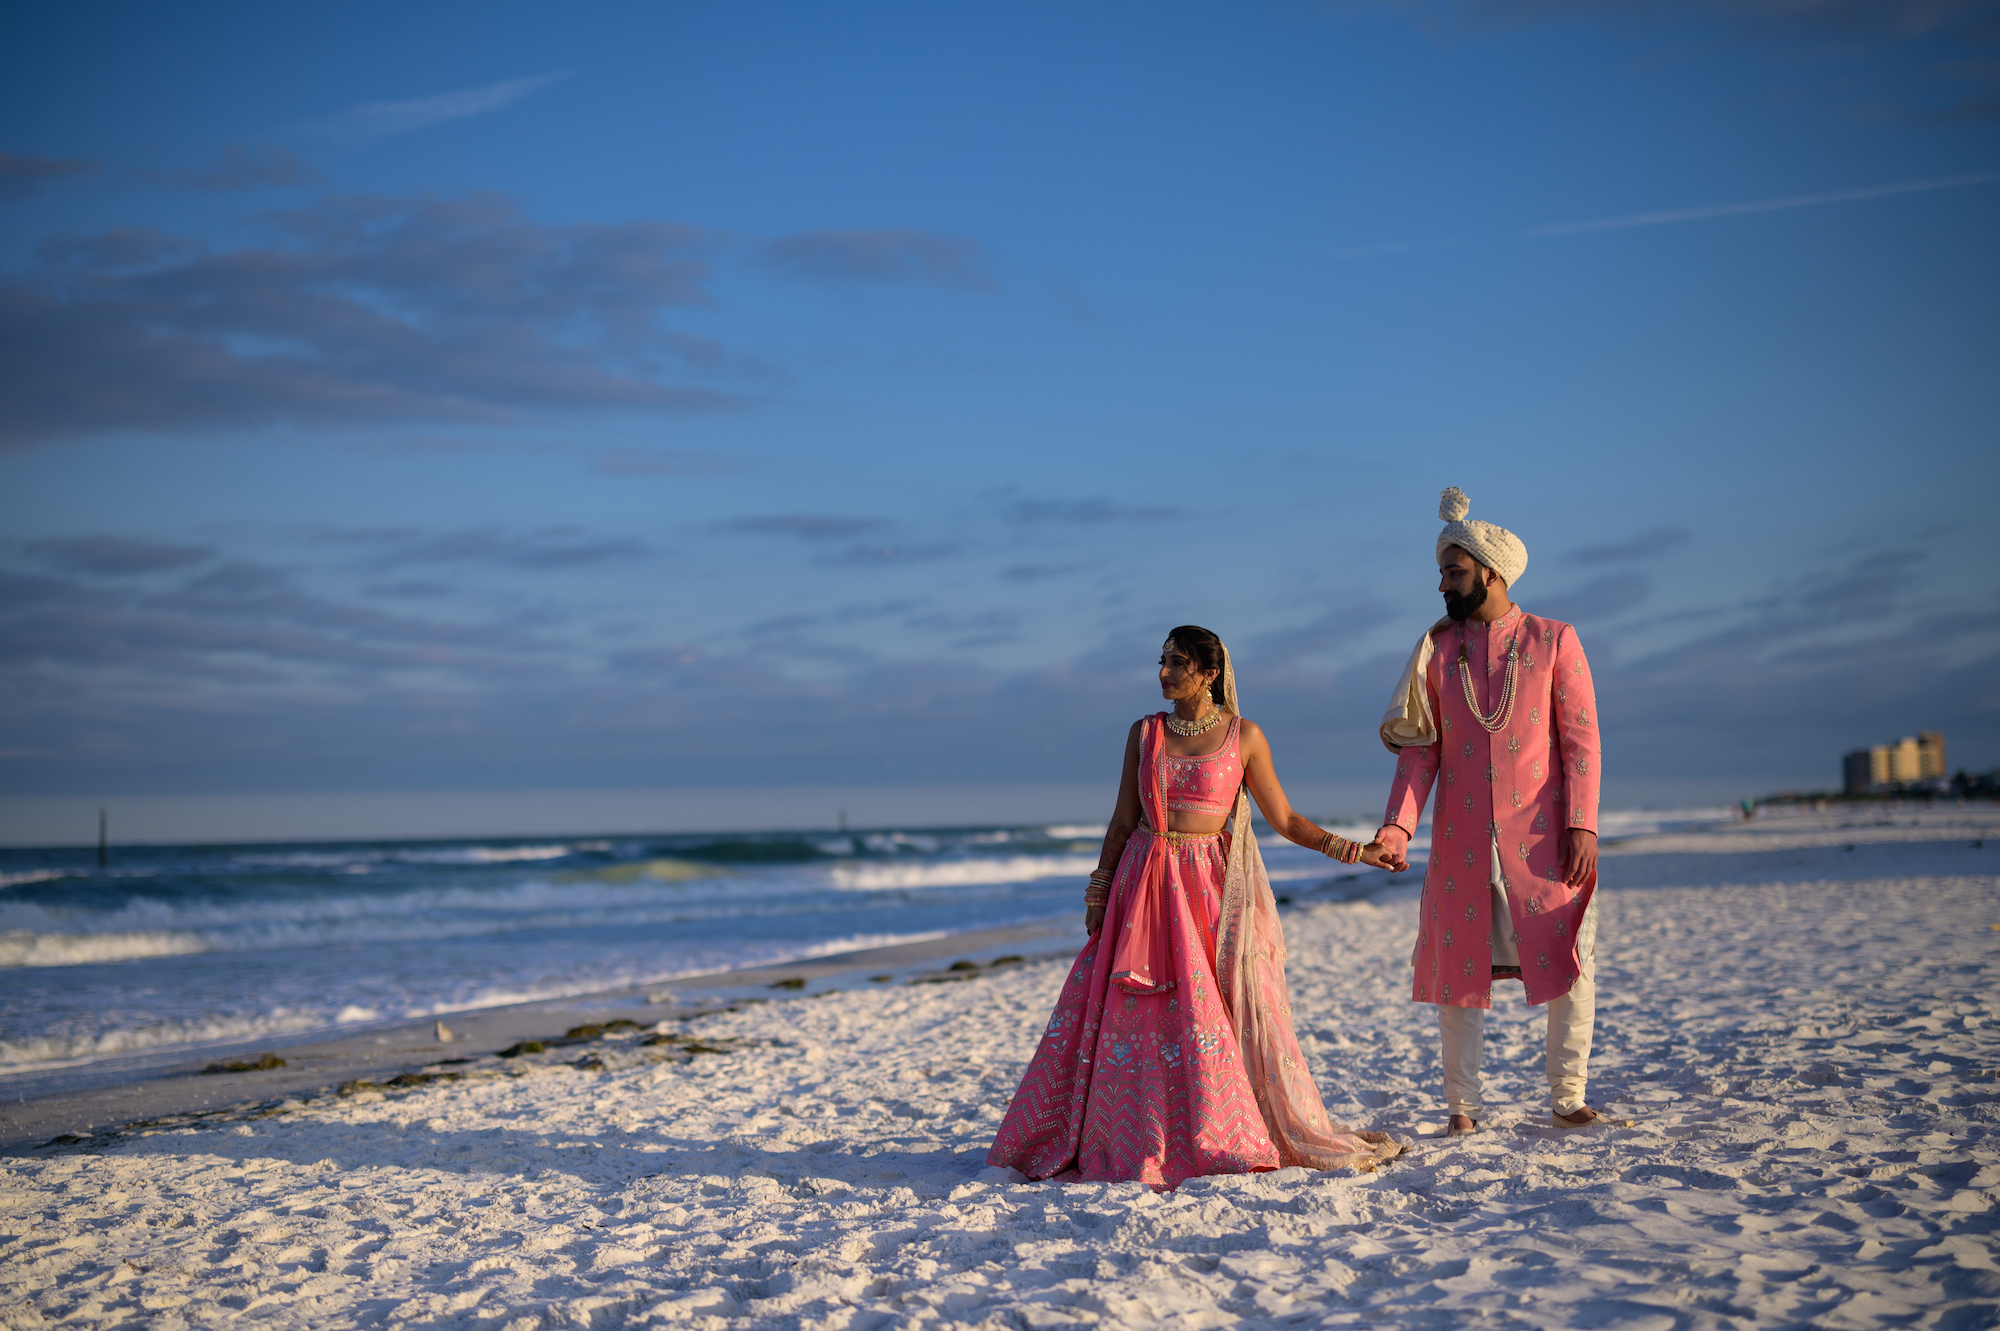 Bride and Groom Walk Down Beach, Wearing Traditional Indian Wedding Attire in Bright Pink and Gold | Florida Wedding Venue Hilton Clearwater Beach Resort